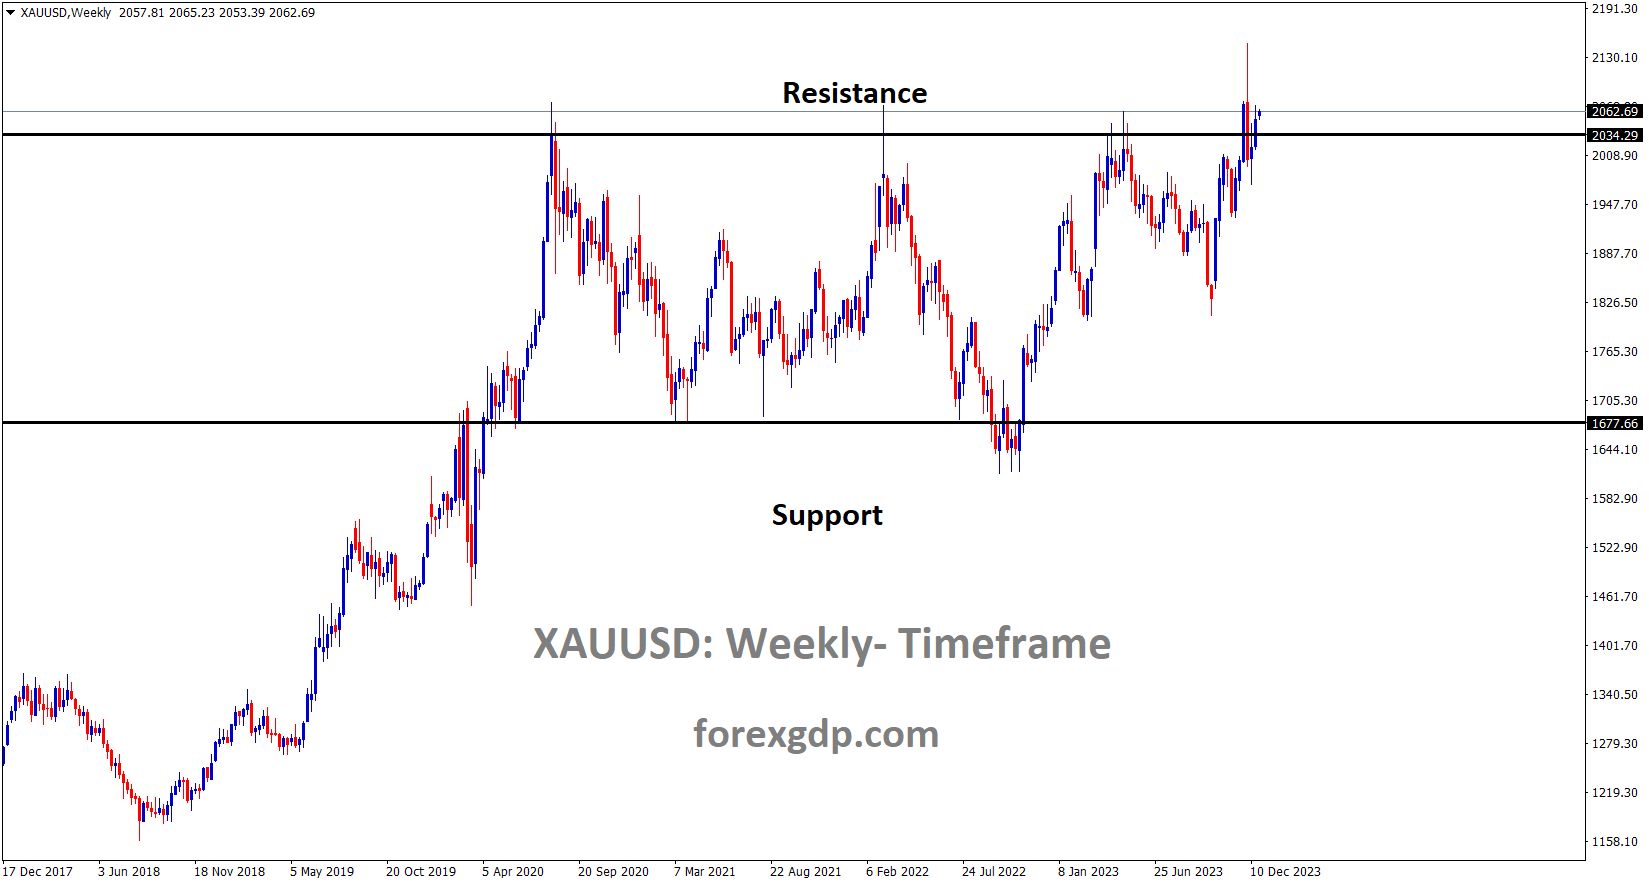 XAUUSD Gold price is moving in the Box pattern and the market has reached the resistance area of the pattern.